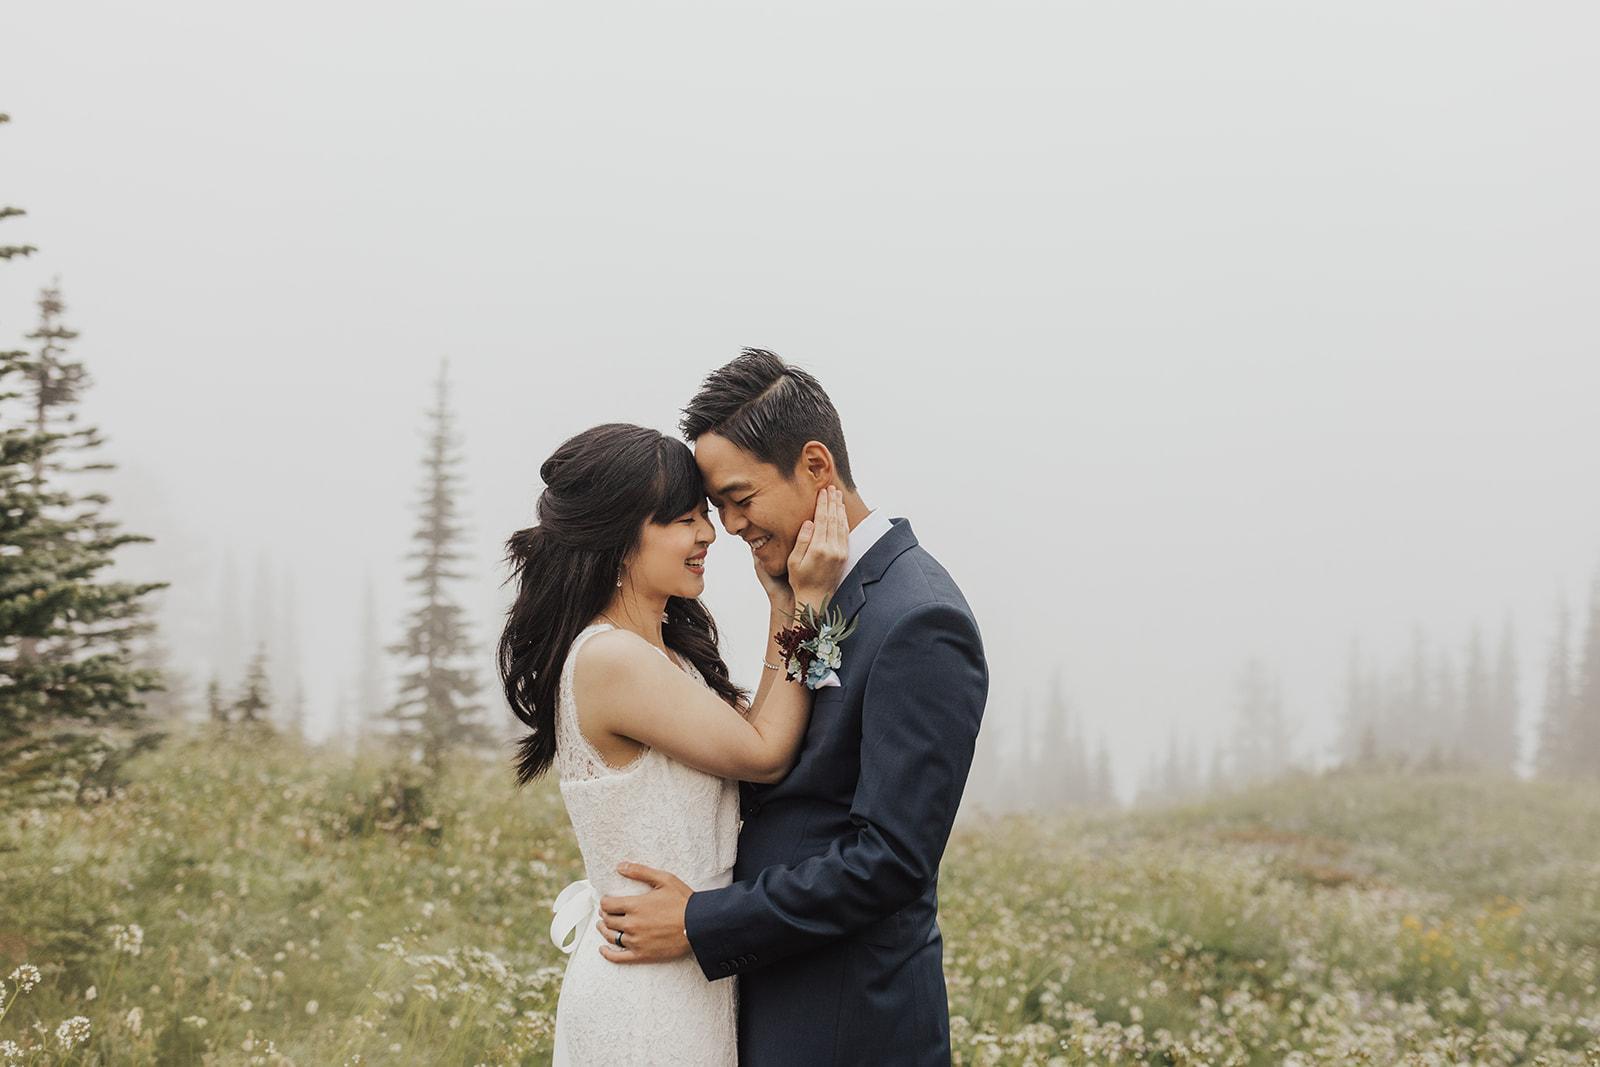 The Wedding Website of Steven Hsieh and Hanna Dinh